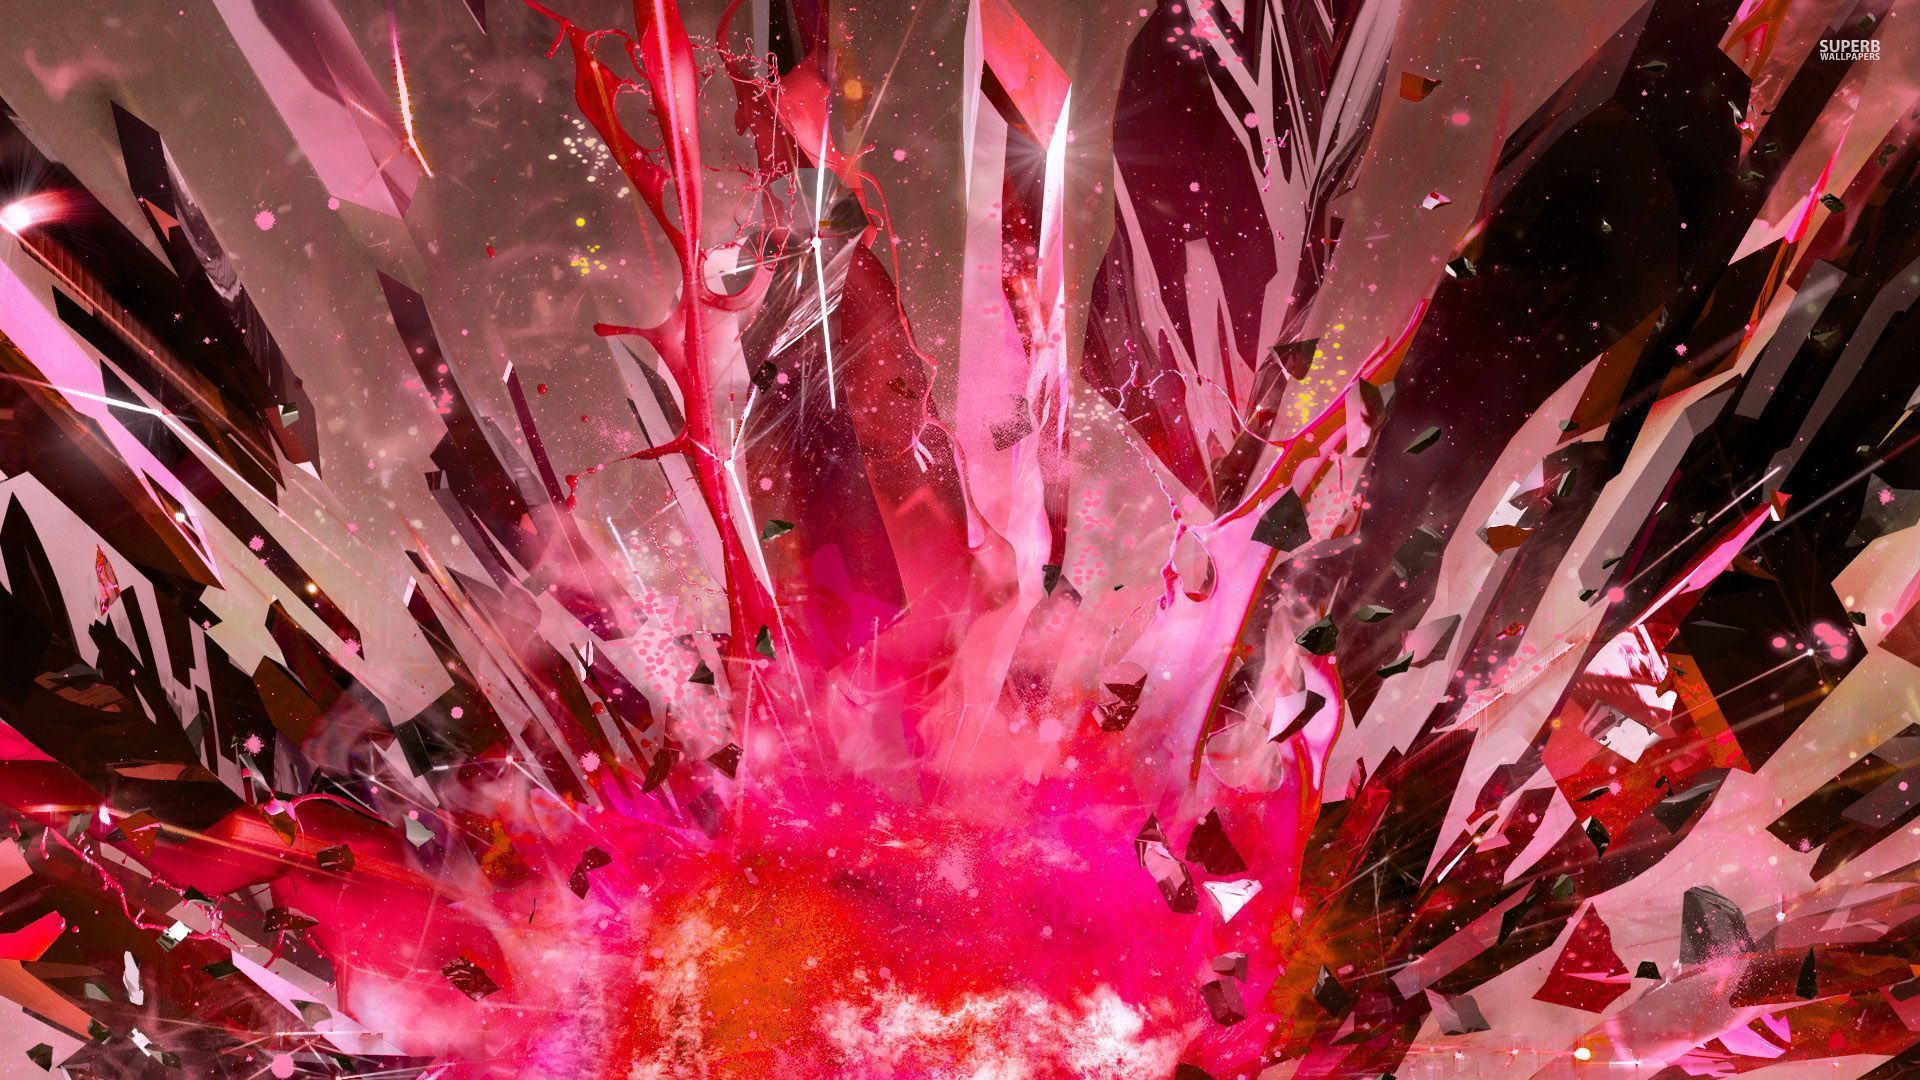 Pink exploding crystals : Desktop and mobile wallpaper : Wallippo